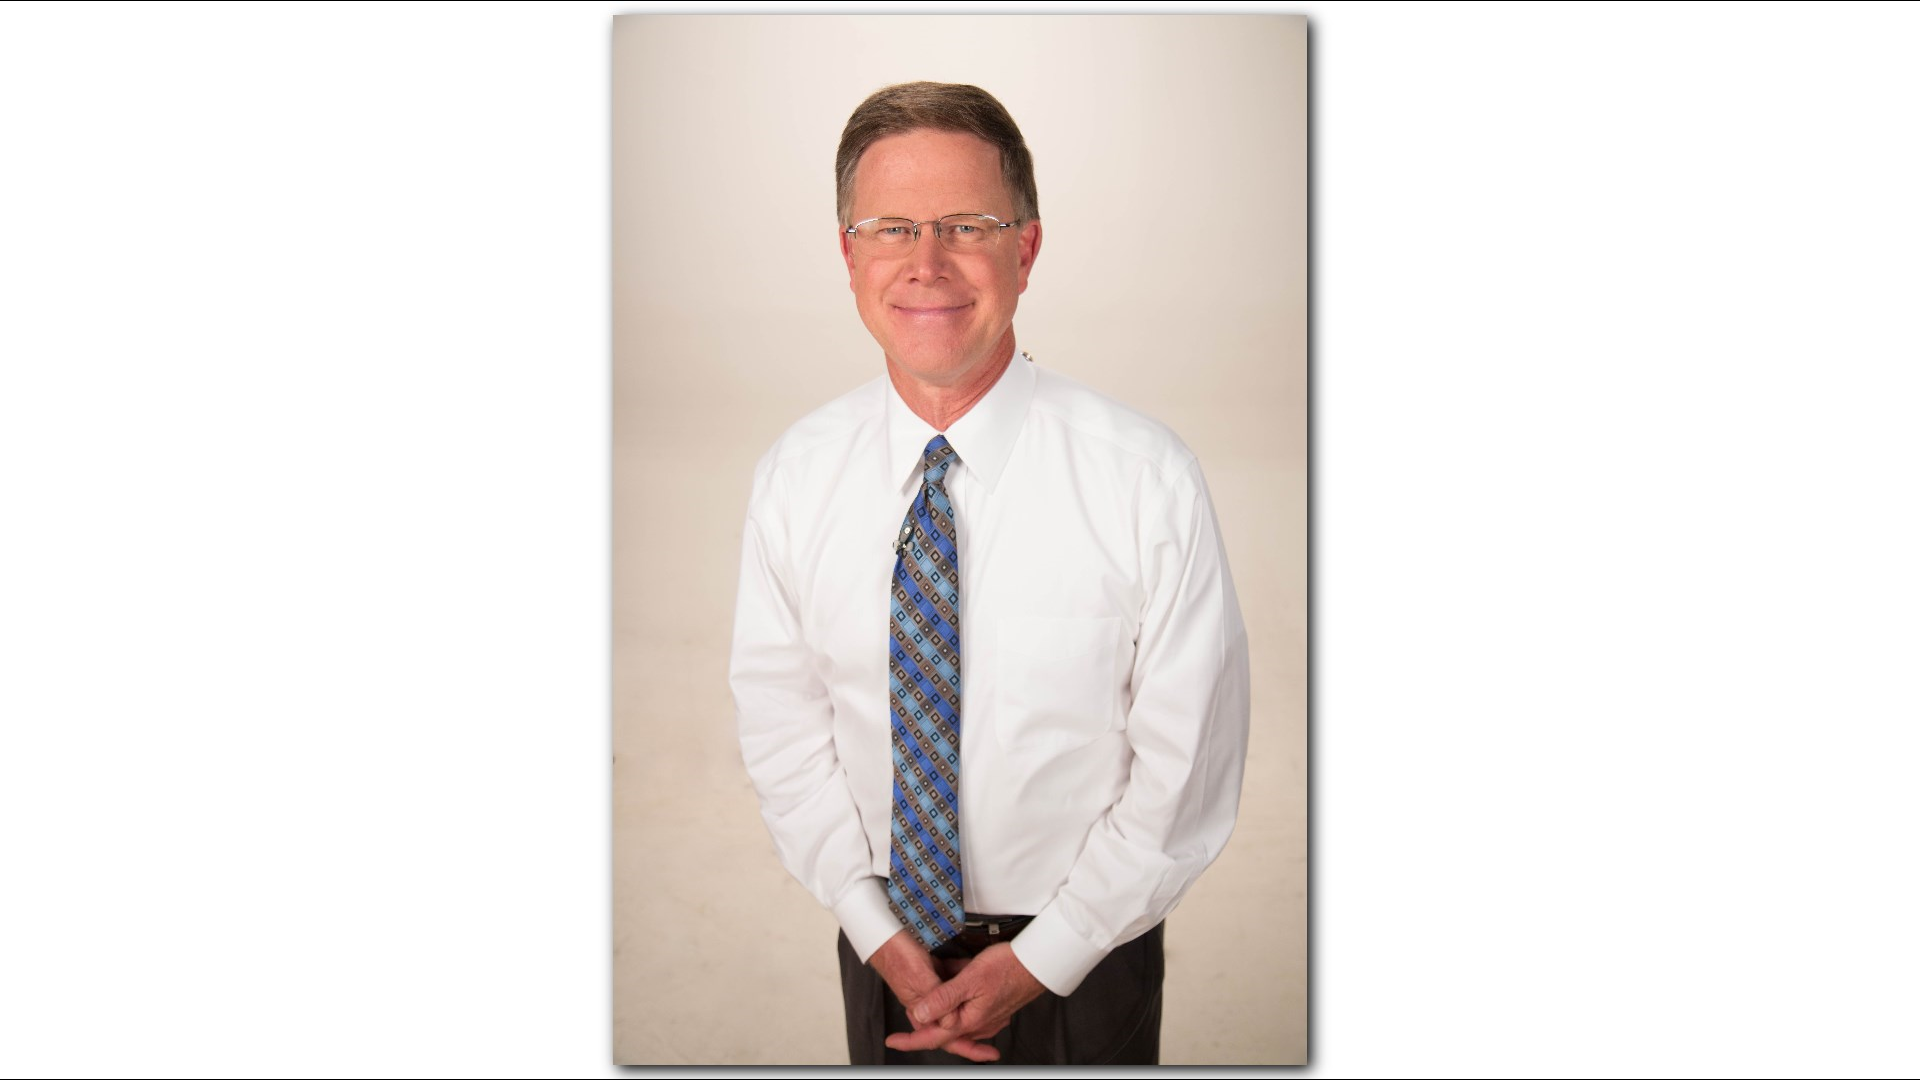 You've watched him on 10News for more than 20 years. Get to know WBIR Chief Meteorologist Todd Howell a little better.